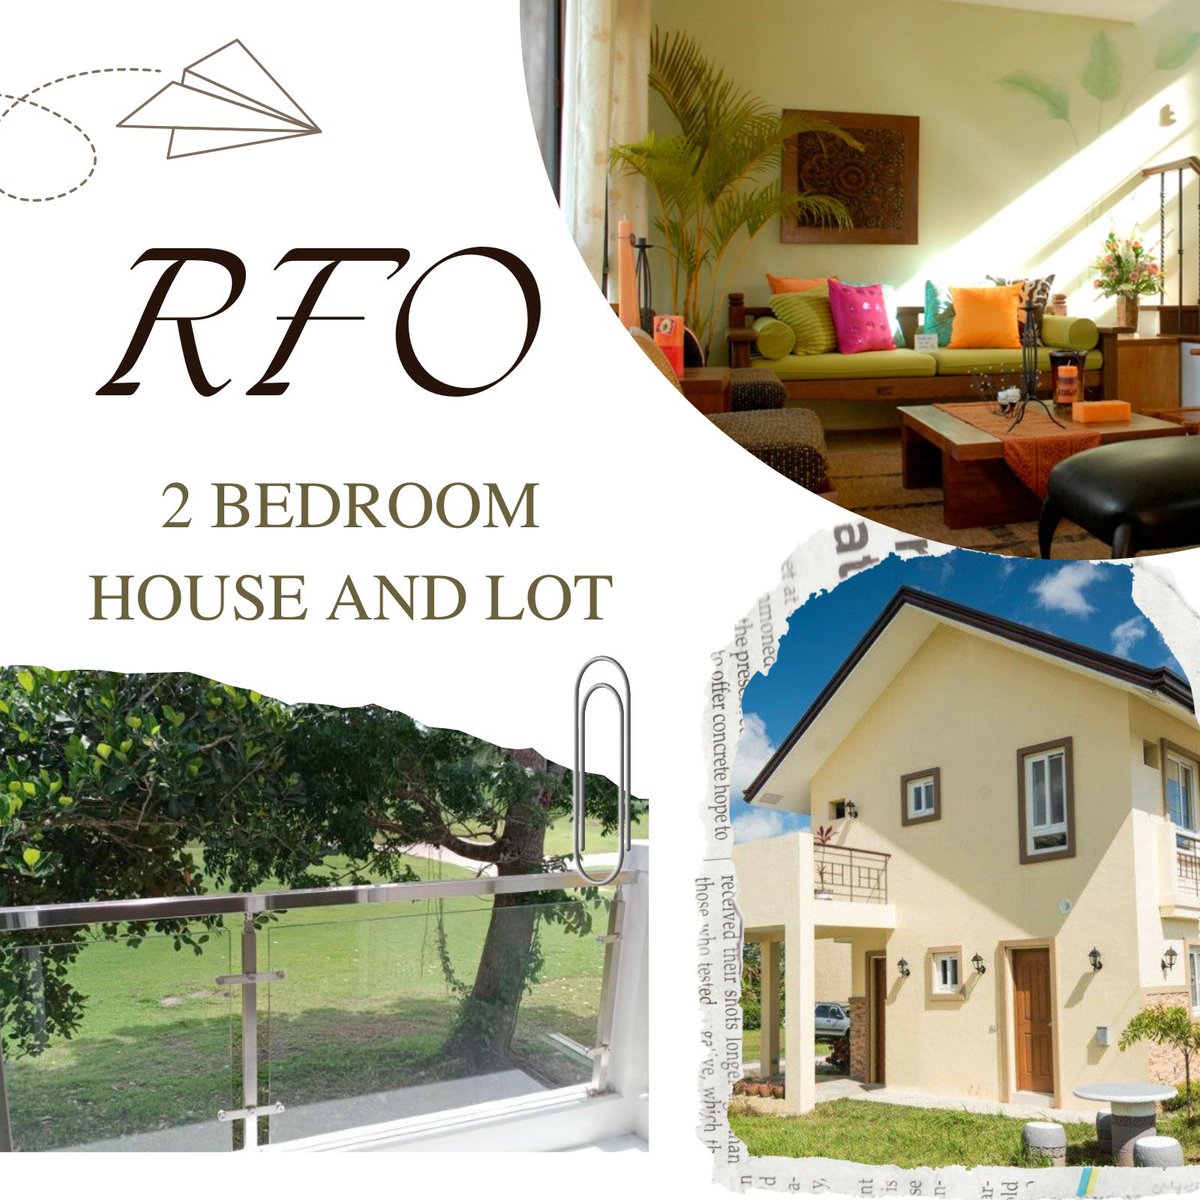 2 bedroom House & Lot for Sale Golf Community in Silang-Tagaytay